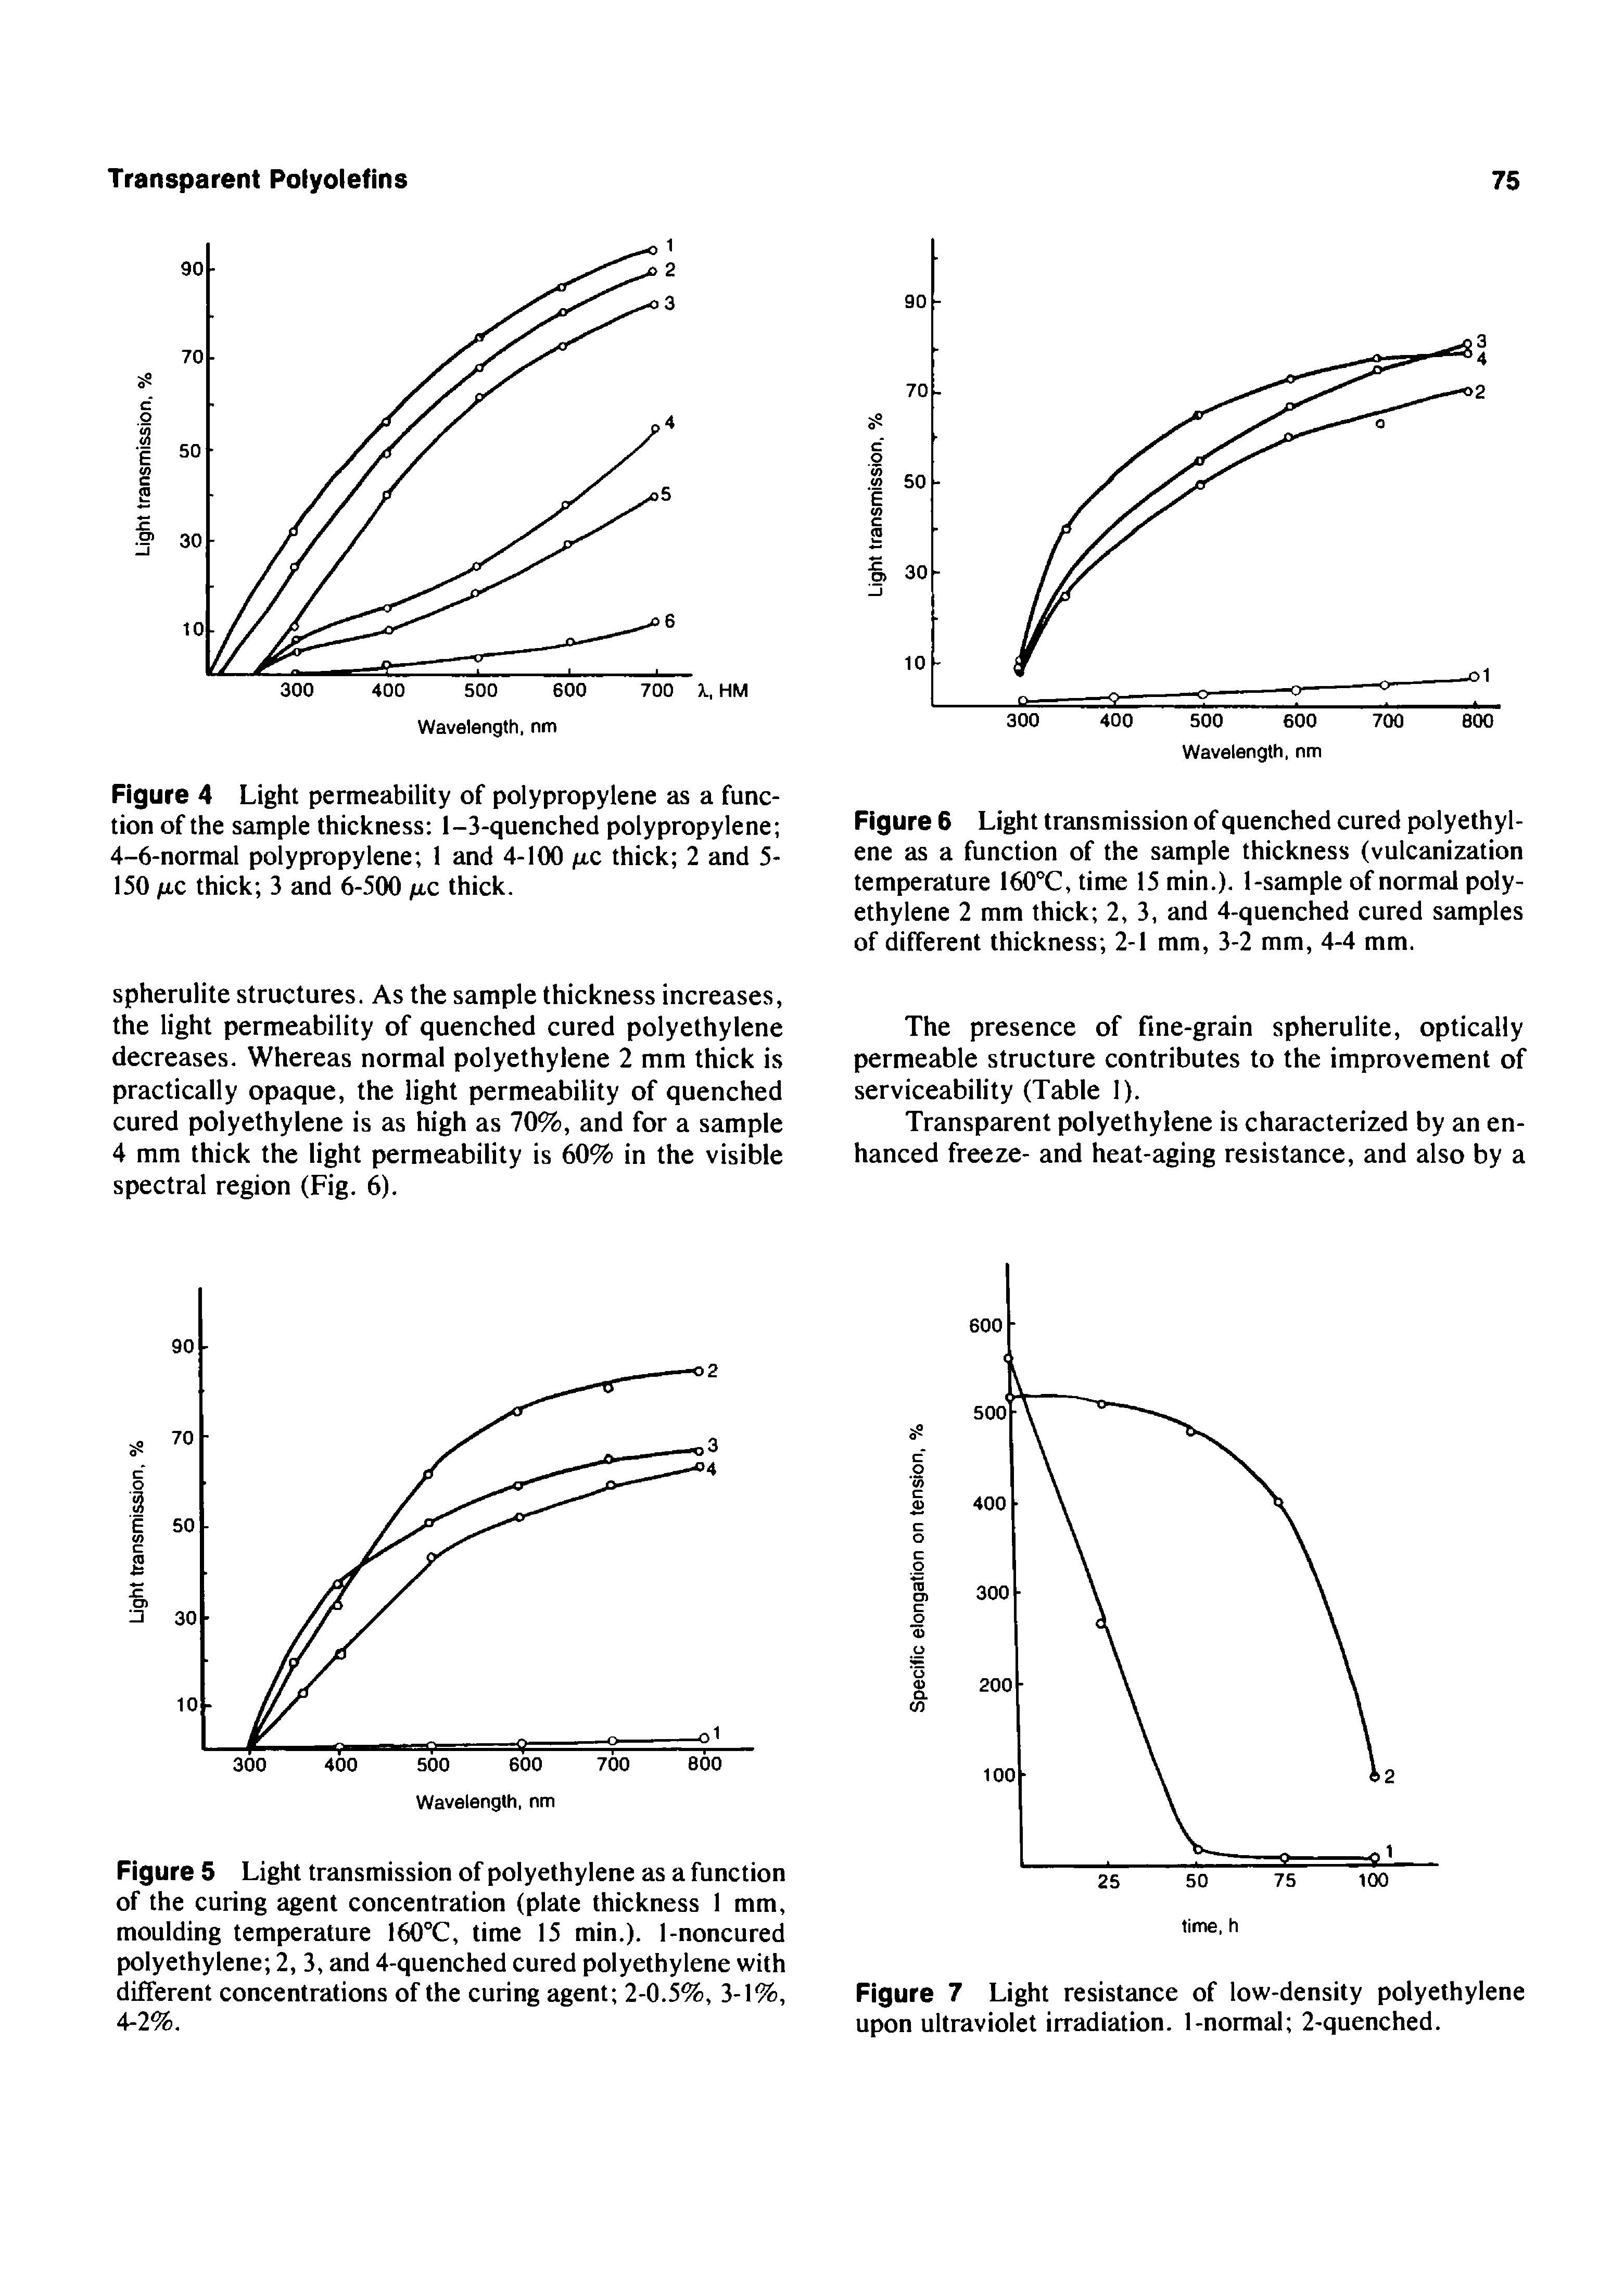 Figure 5 Light transmission of polyethylene as a function of the curing agent concentration (plate thickness 1 mm, moulding temperature 160°C, time 15 min.). 1-noncured polyethylene 2, 3, and 4-quenched cured polyethylene with different concentrations of the curing agent 2-0.5%, 3-1%, 4-2%.